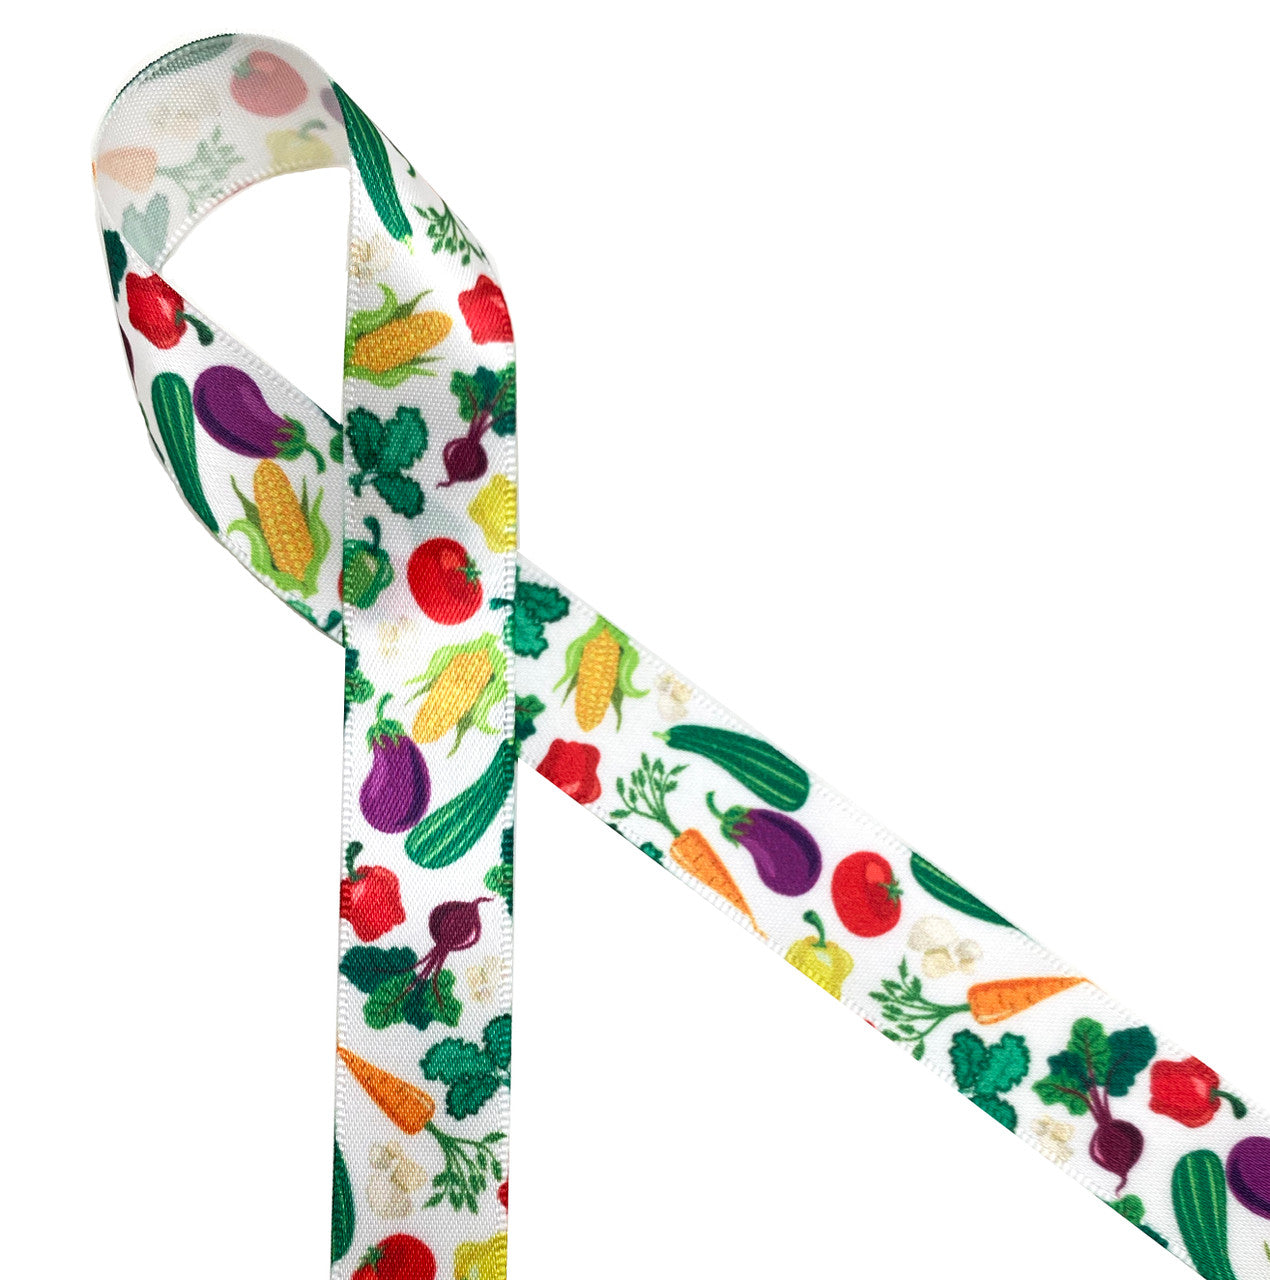 Colorful veggies include tomatoes, eggplant, carrots, corn and peppers printed on 5/8" white single face satin ribbon is a fun ribbon for your  favorite grocer, chef and food delivery person. All our ribbon is designed and printed in the USA